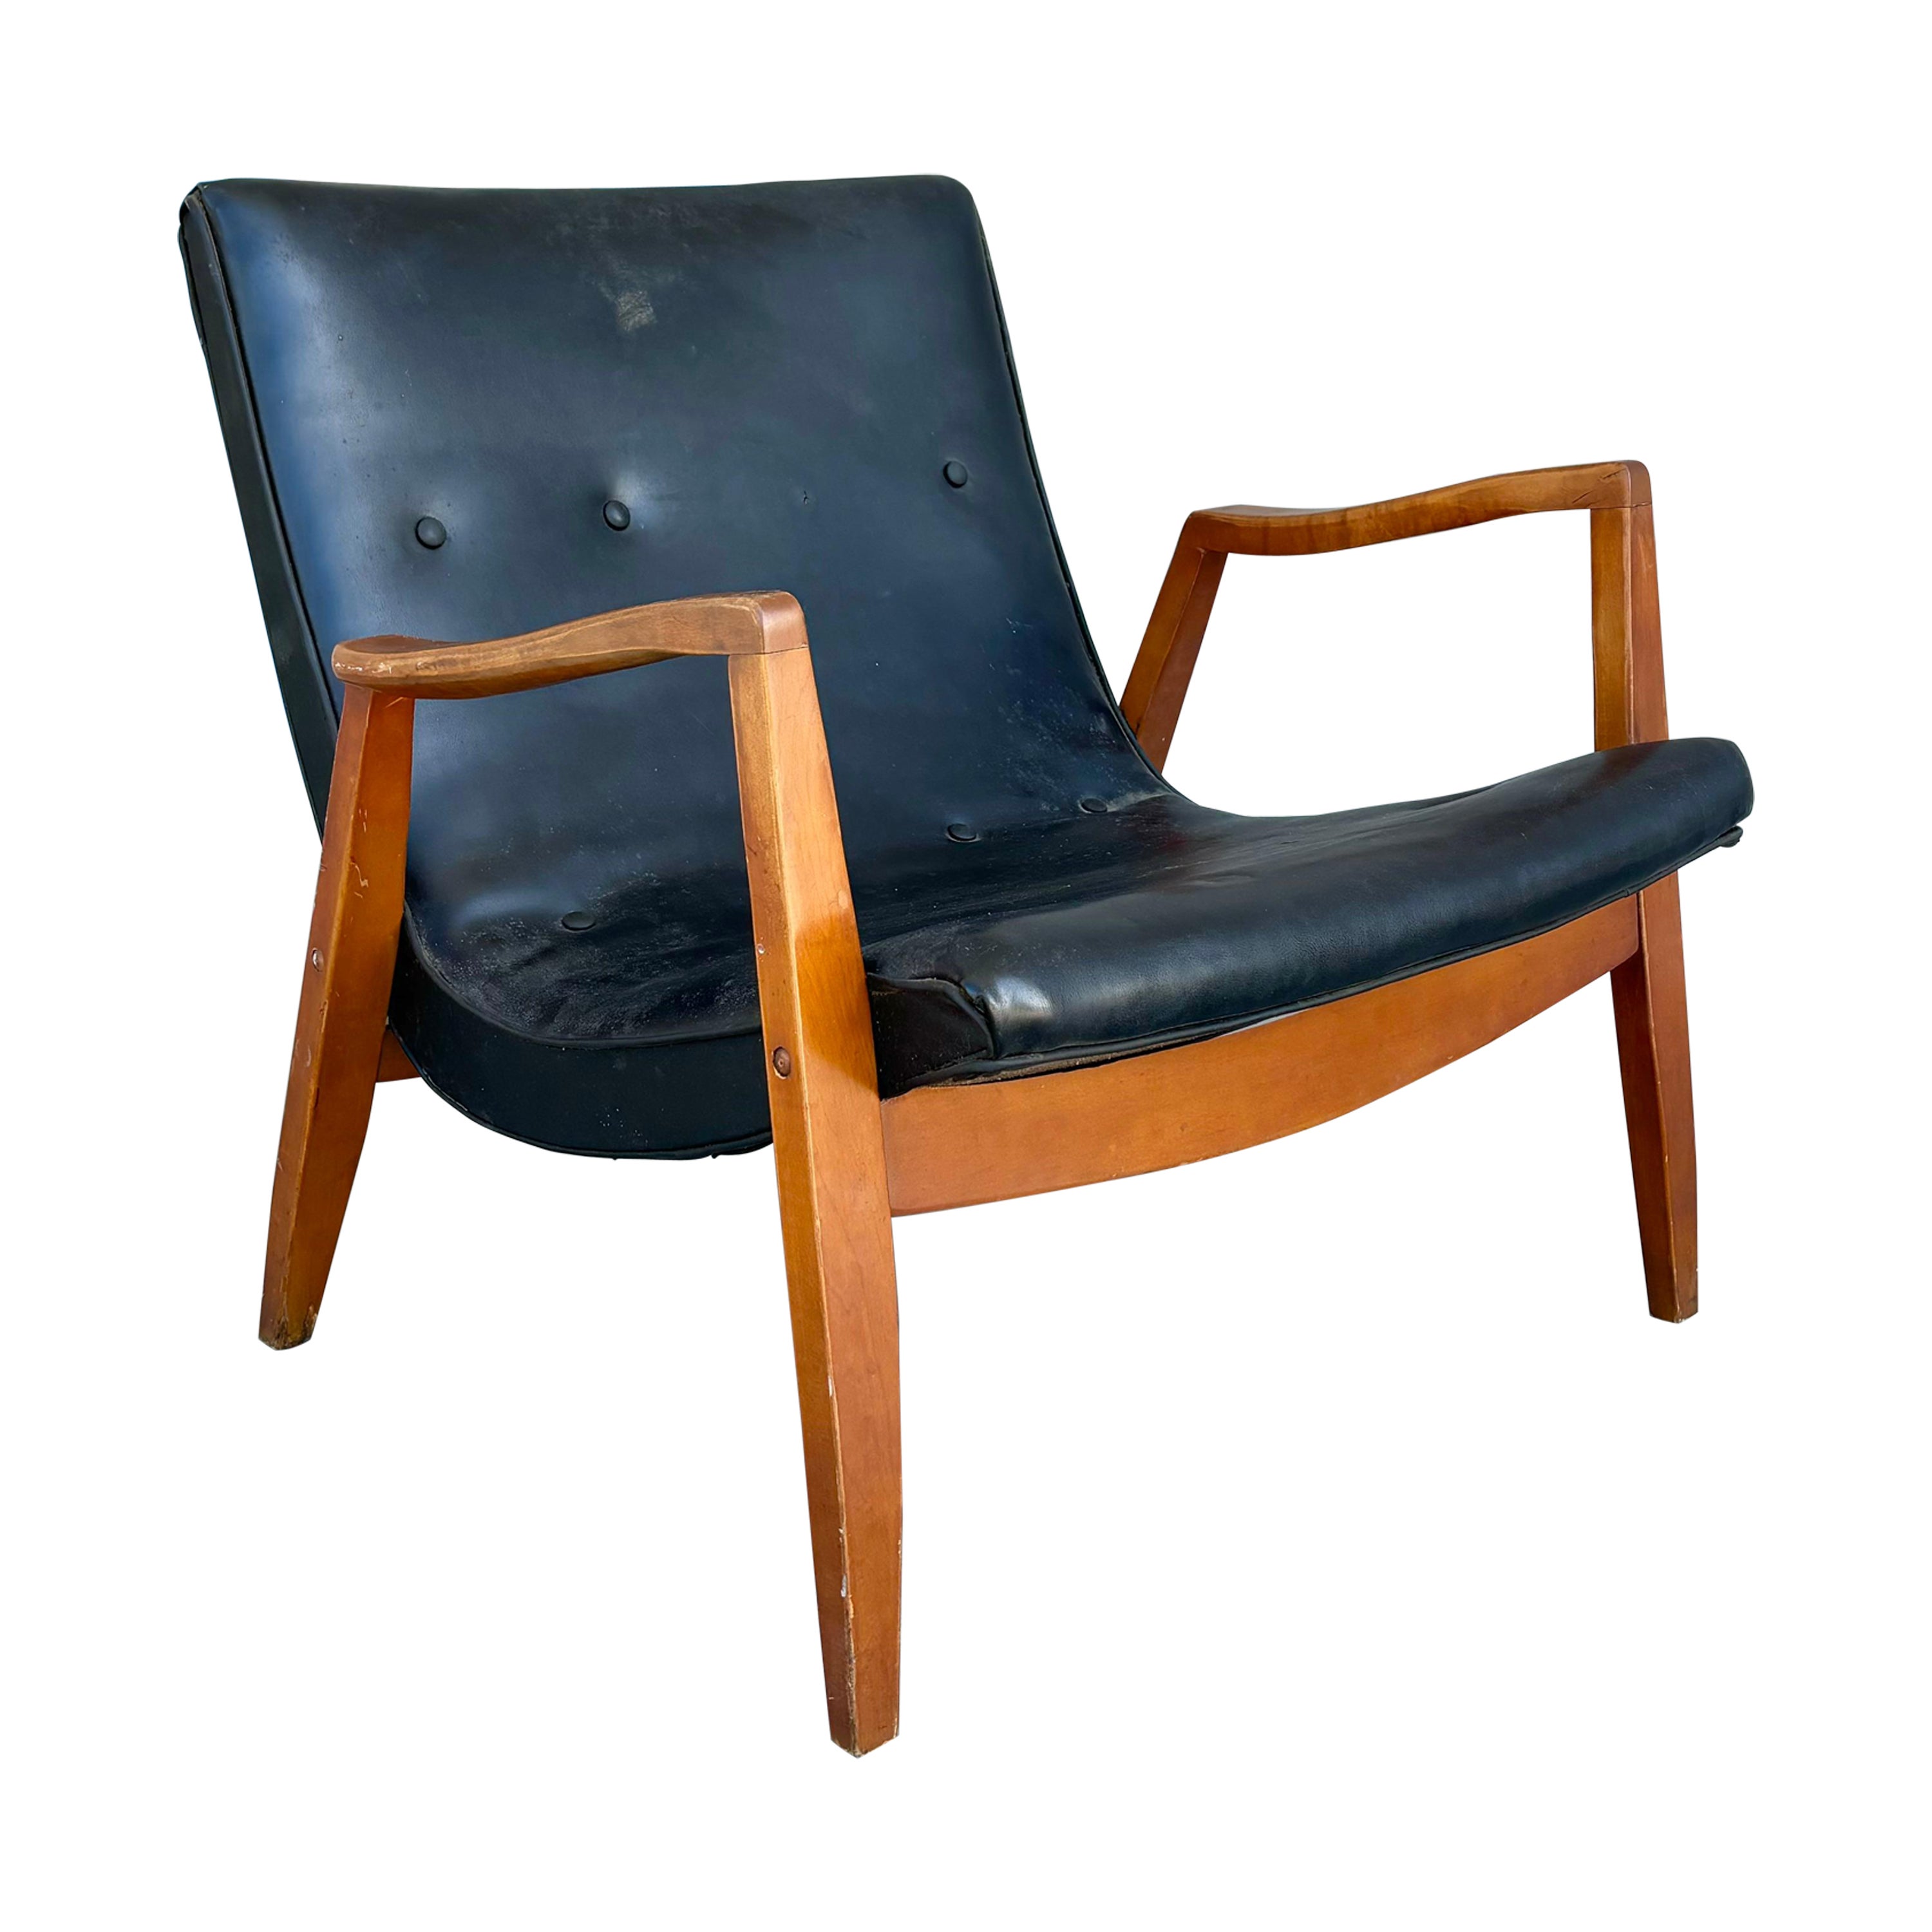 1960s Mid Century Scoop Lounge Chair Designed by Milo Baughman